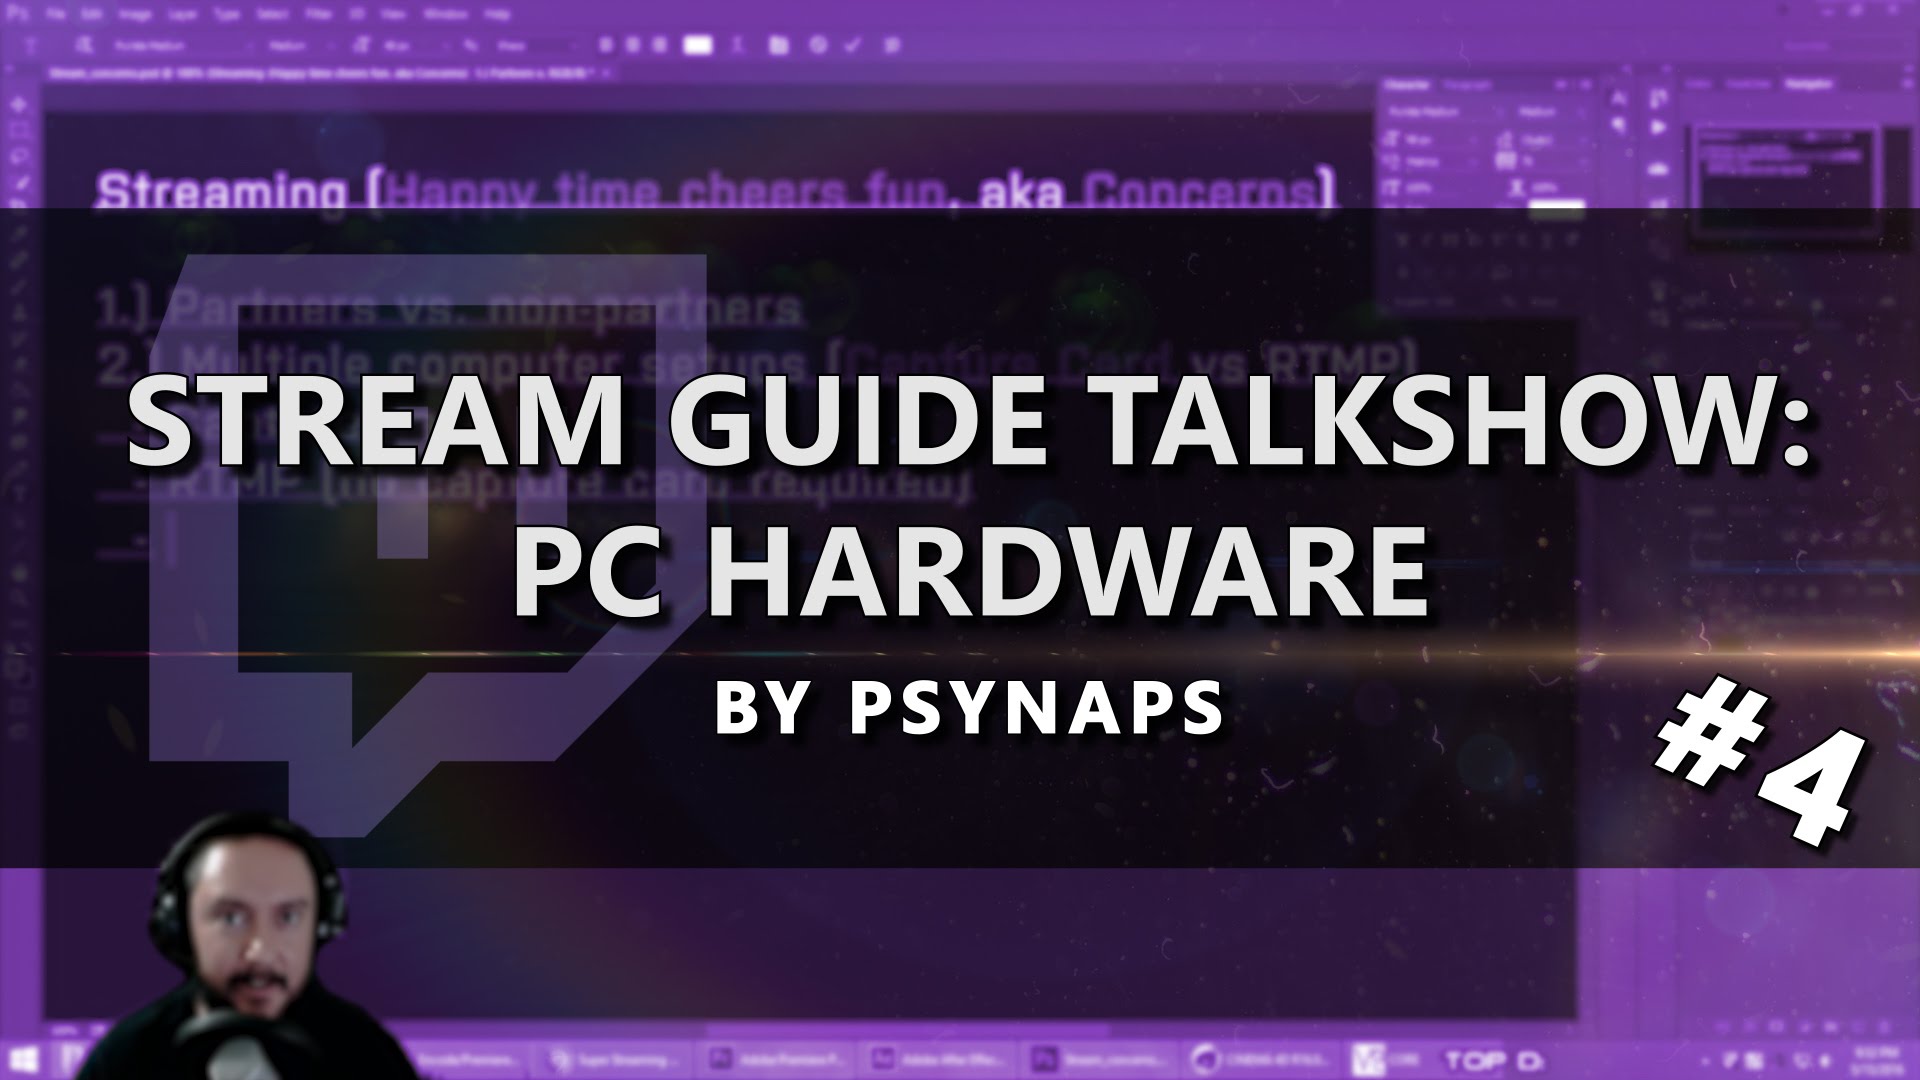 PC Hardware for Streaming – Stream Guide Talk Show (Part 4/4)